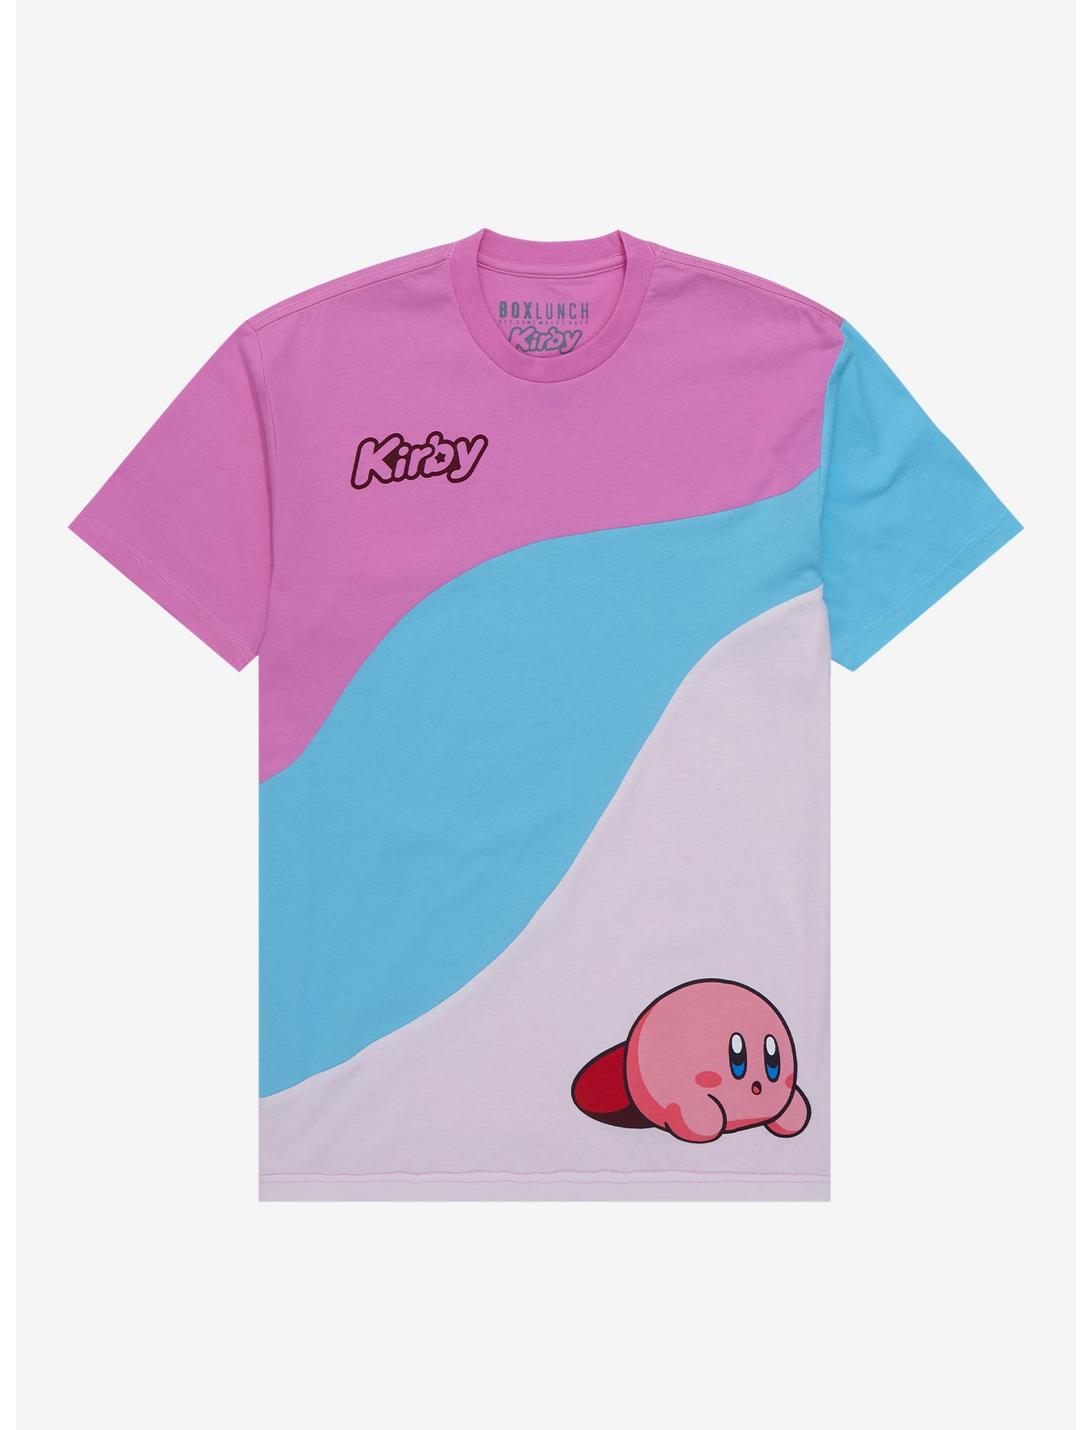 Nintendo Kirby Wave Panel Women’s T-Shirt - BoxLunch Exclusive, MULTI, hi-res